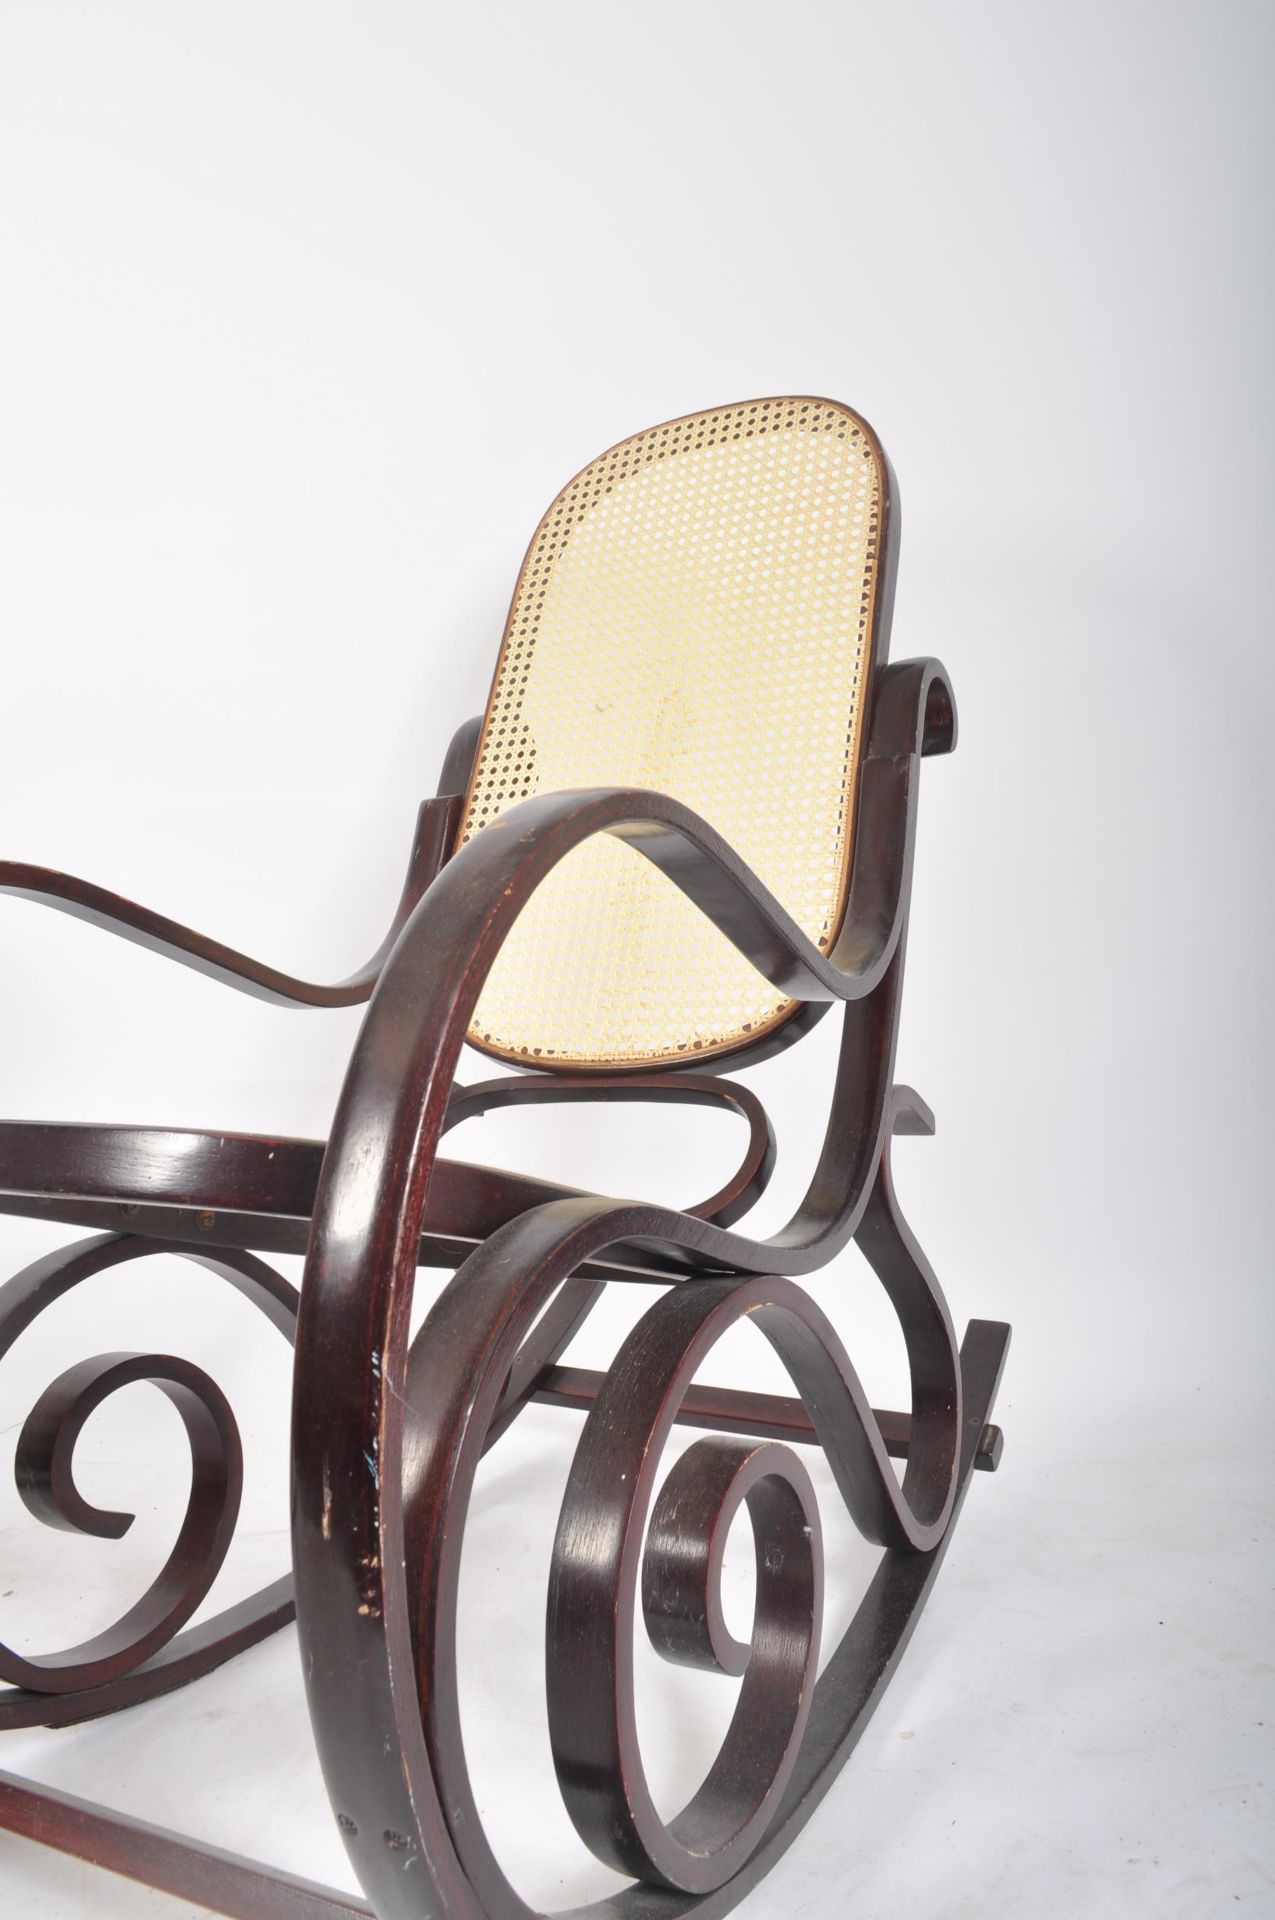 PAIR 20TH CENTURY THONET STYLE BENTWOOD ROCKING CHAIR - Image 2 of 6